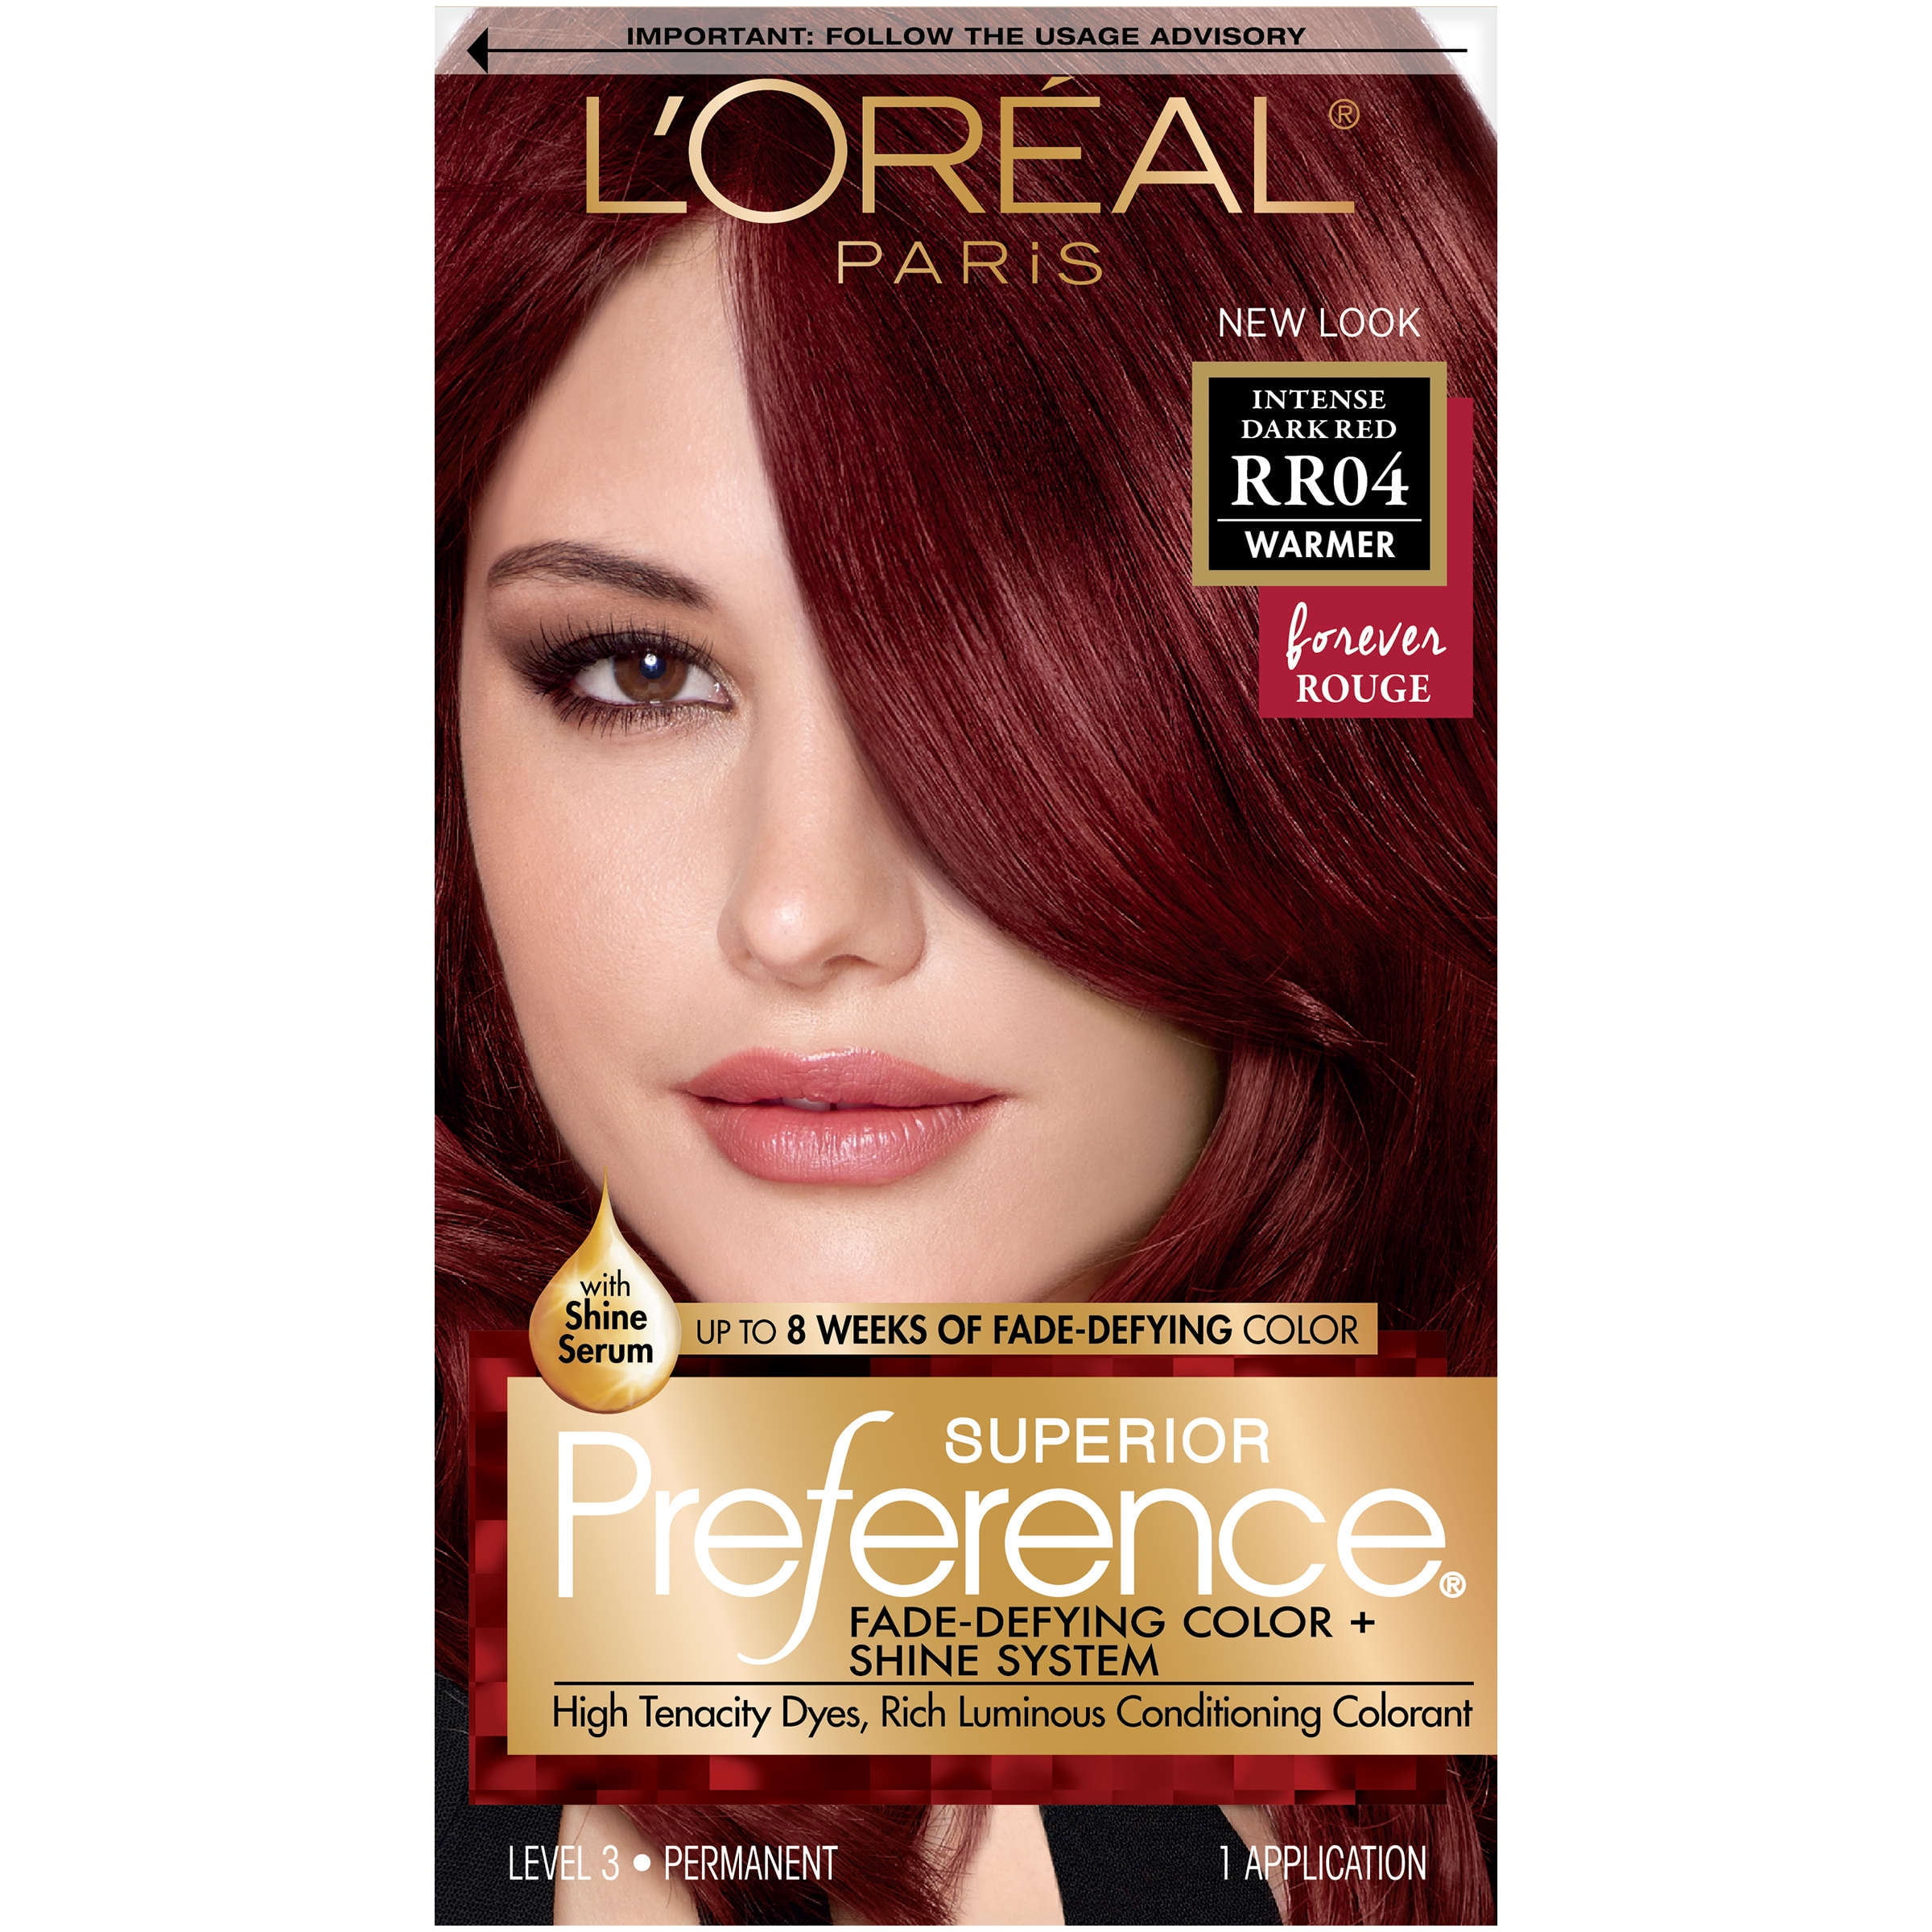 L'Oreal Paris Superior Preference Fade-Defying Shine Permanent Hair Color,  RR-04 Intense Dark Red, 1 Kit 